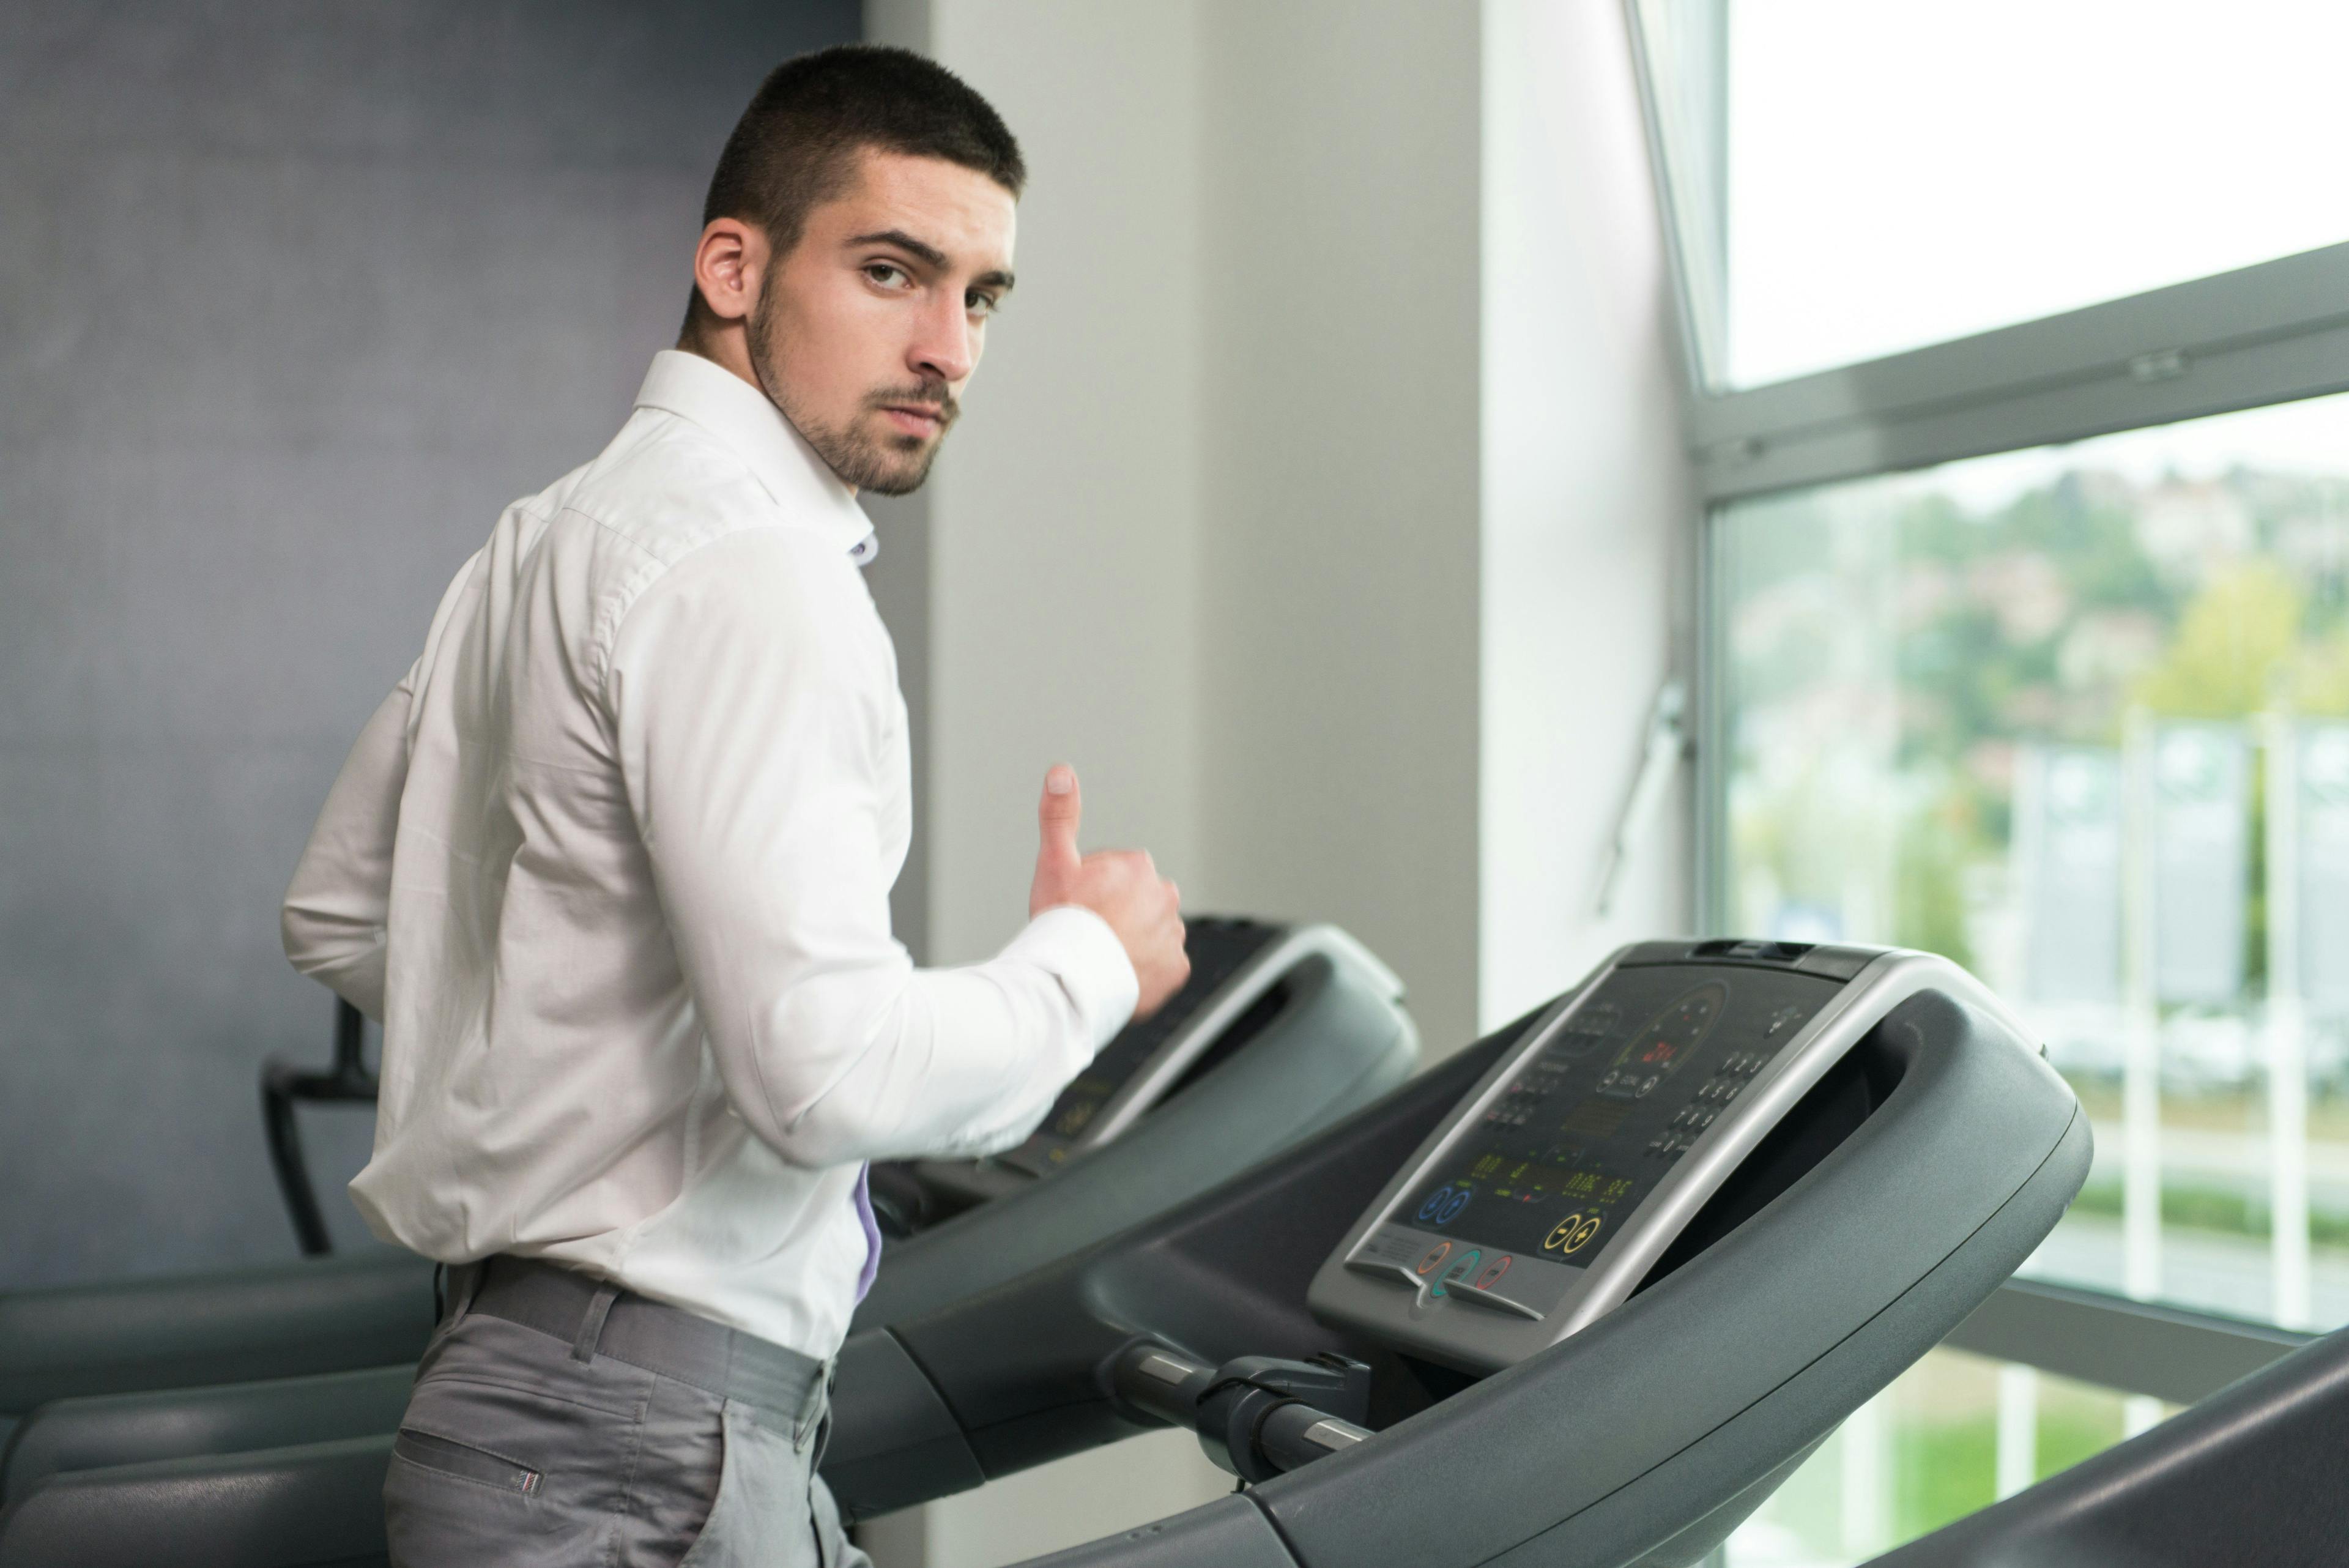 Getting off the corporate treadmill